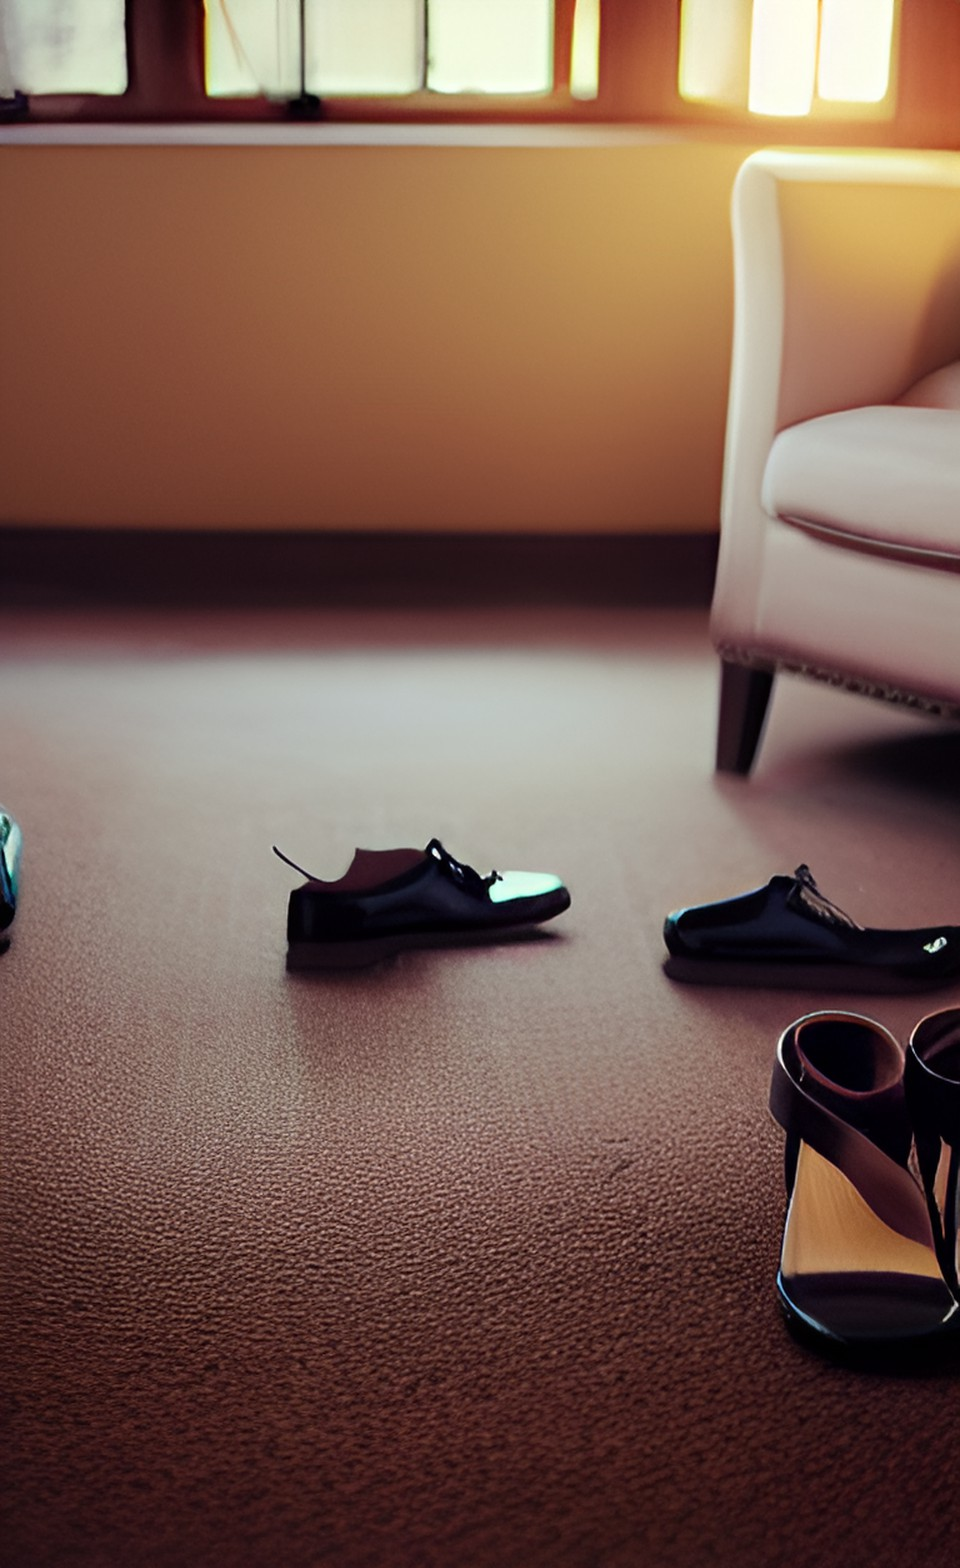 Shoes left in a living room.